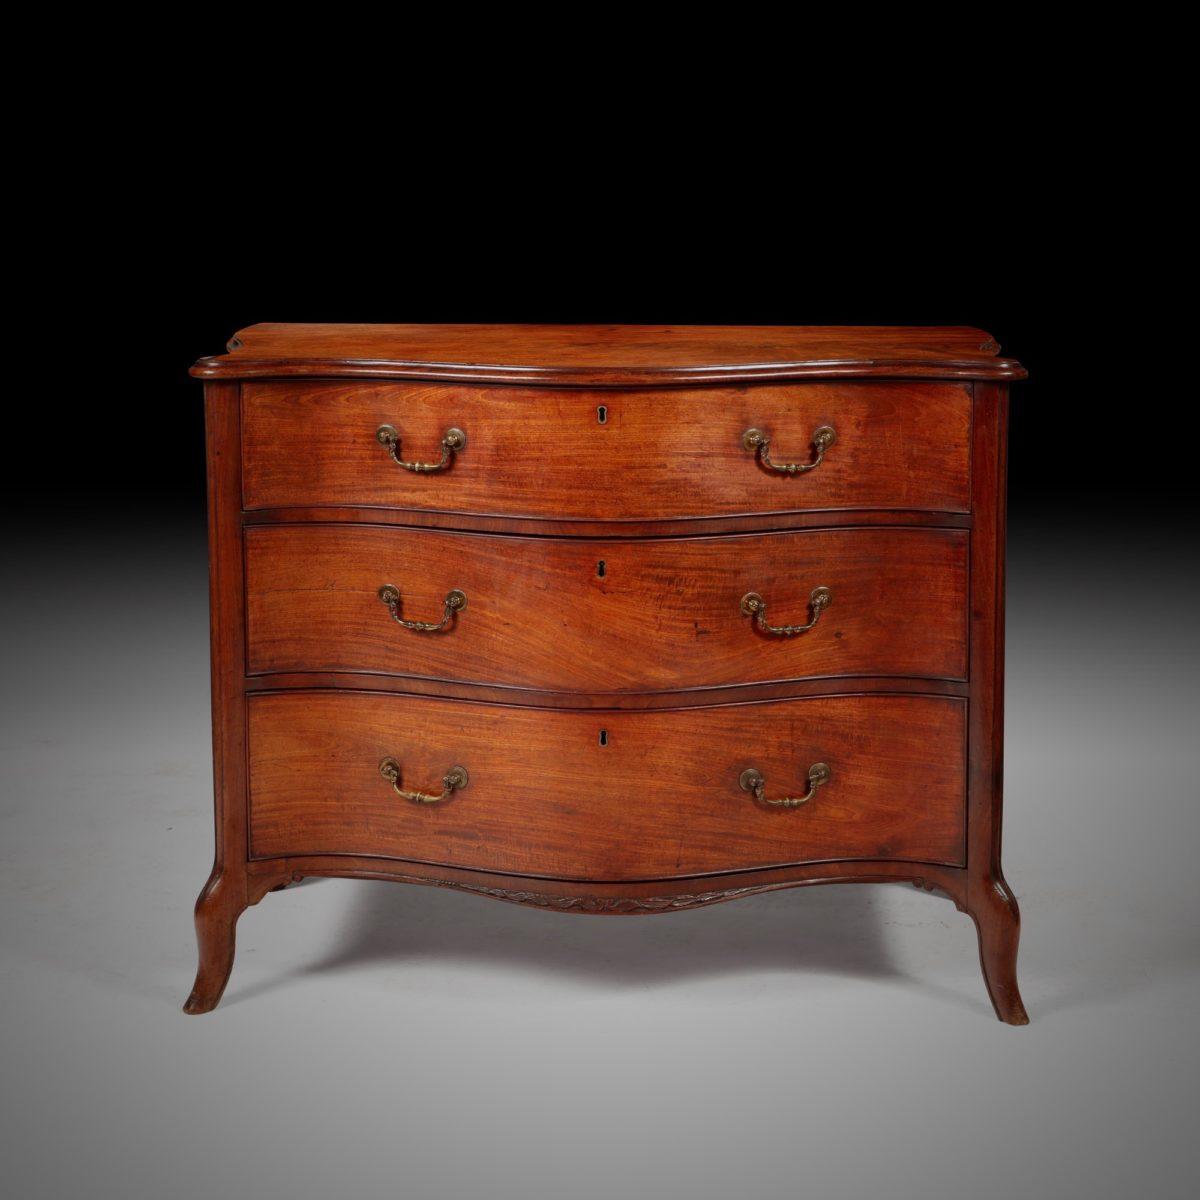 A fine George III mahogany serpentine commode, England, circa 1770. Attributed to Henry Hill, Marlbrough.

The three graduated drawers retain their original gilt brass handles over a unique carved apron and flanked by moulded angles continuing